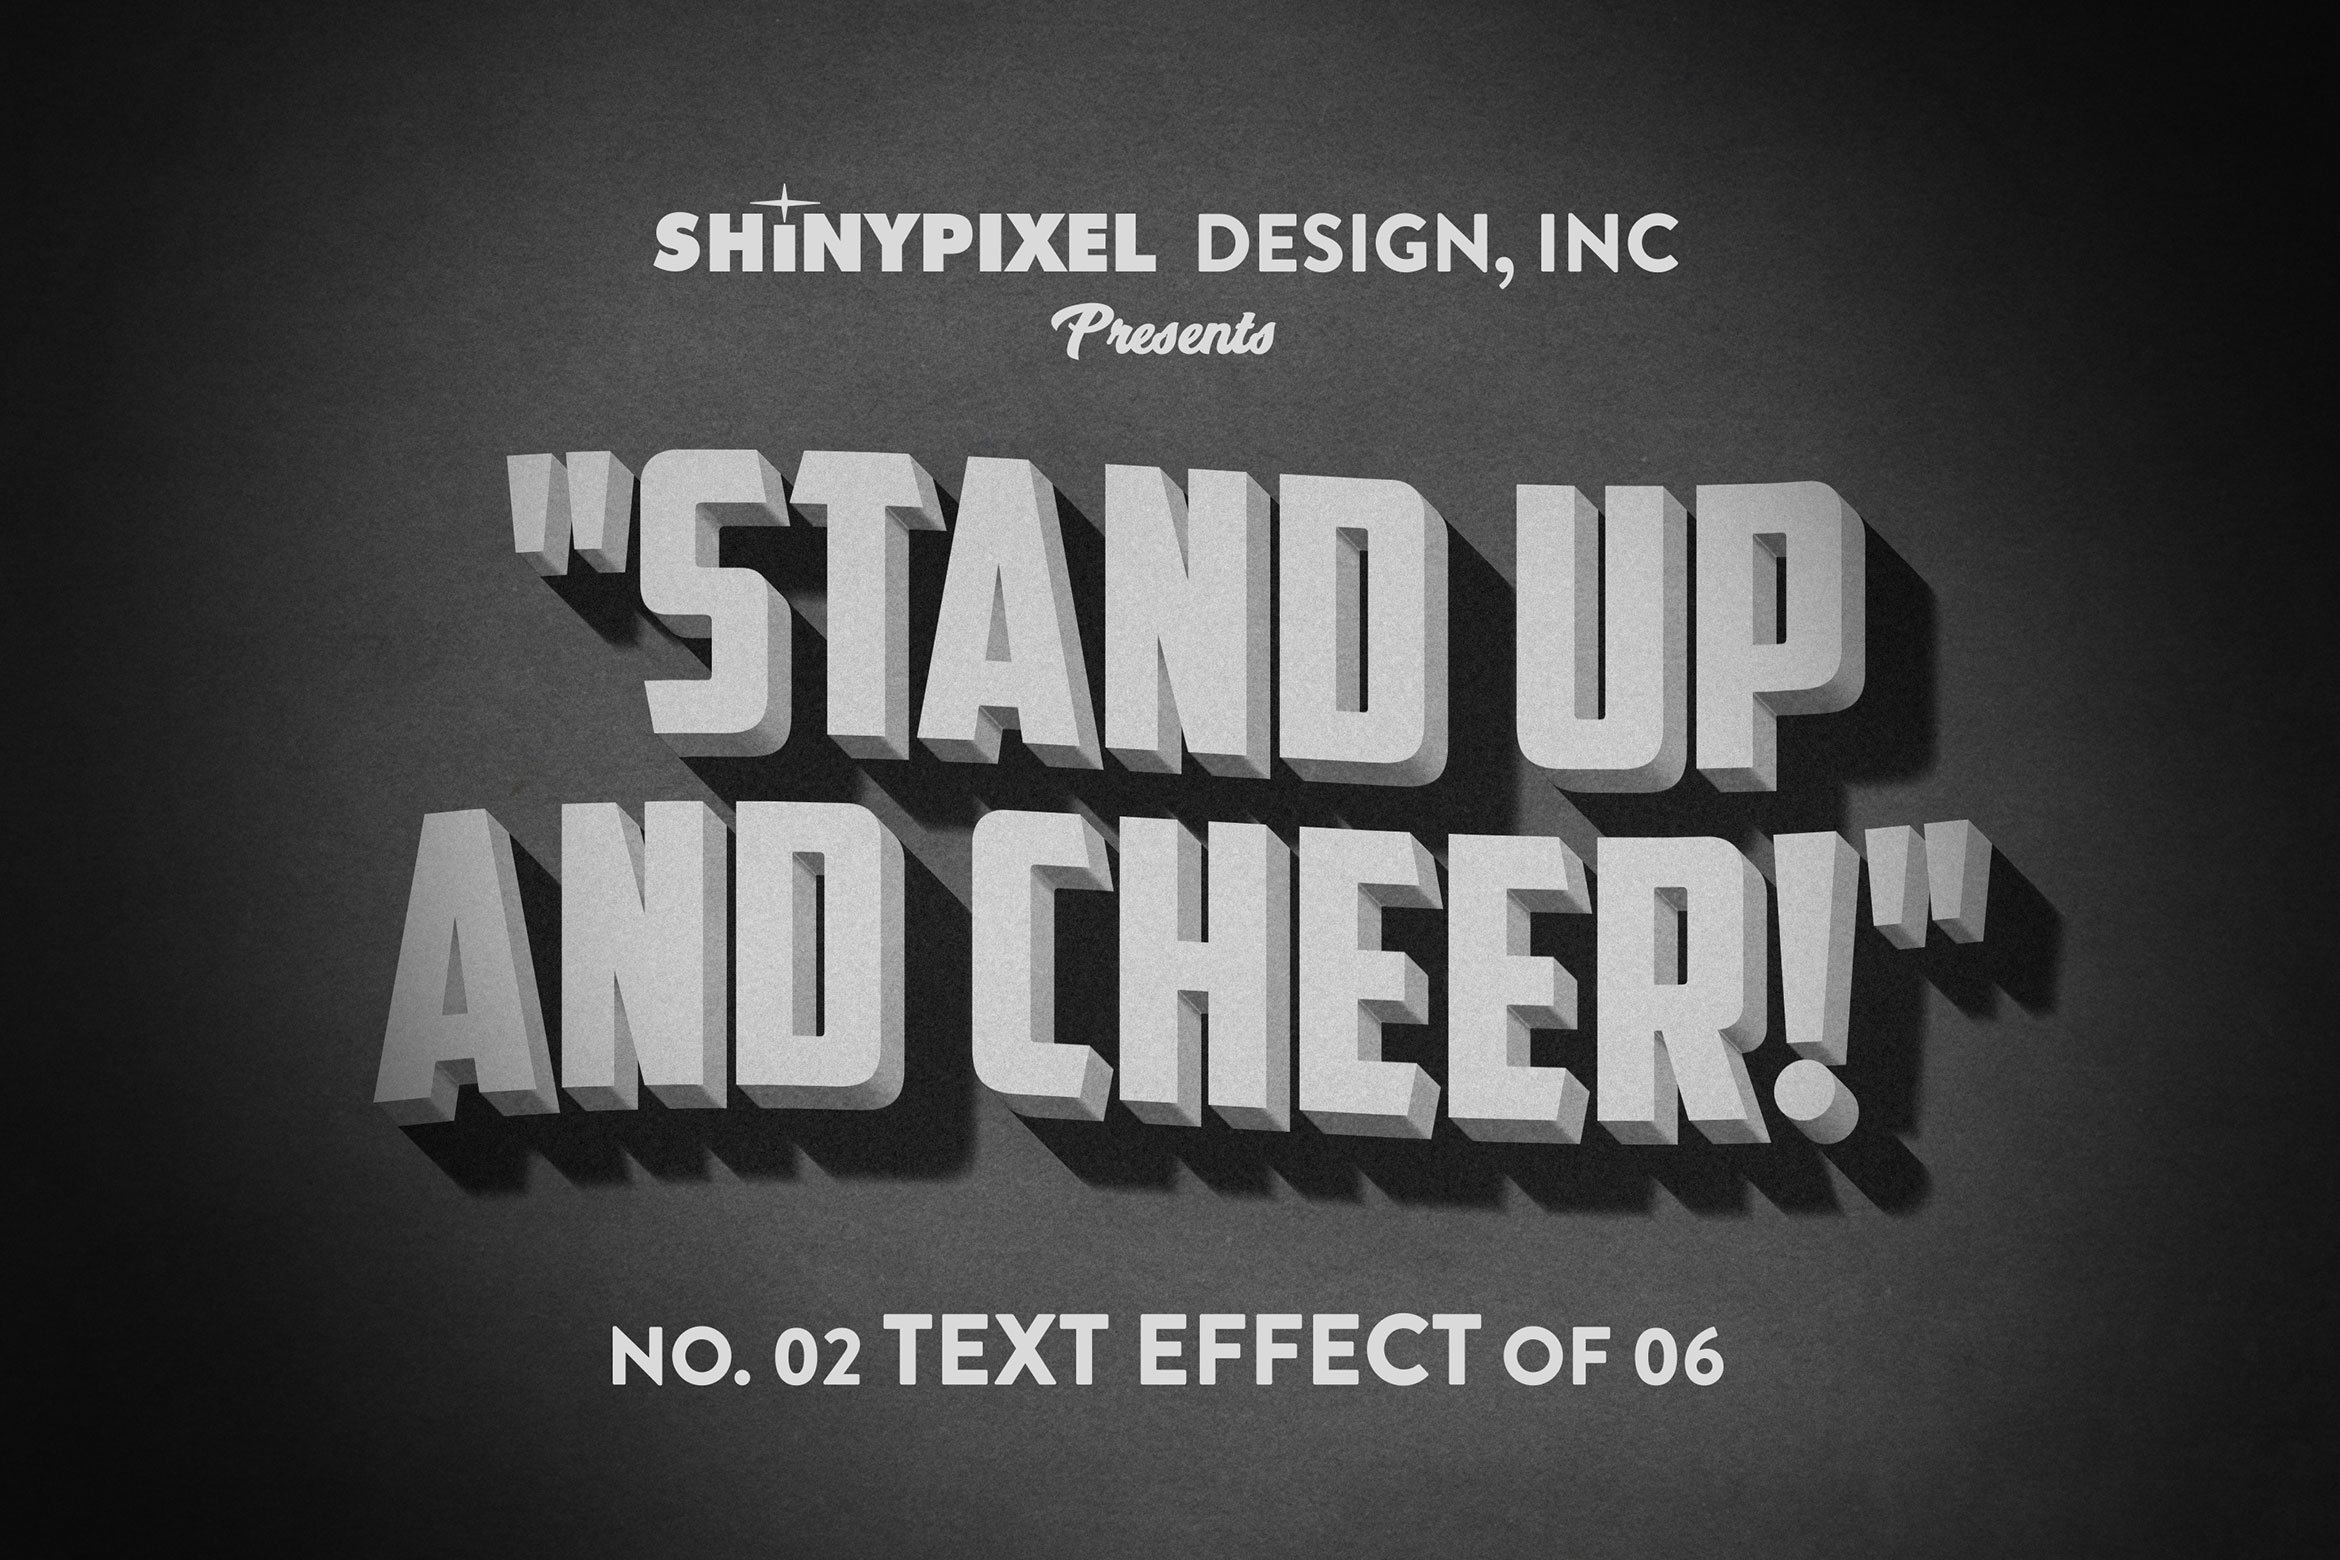 Old Movie Title Text Effectpreview image.